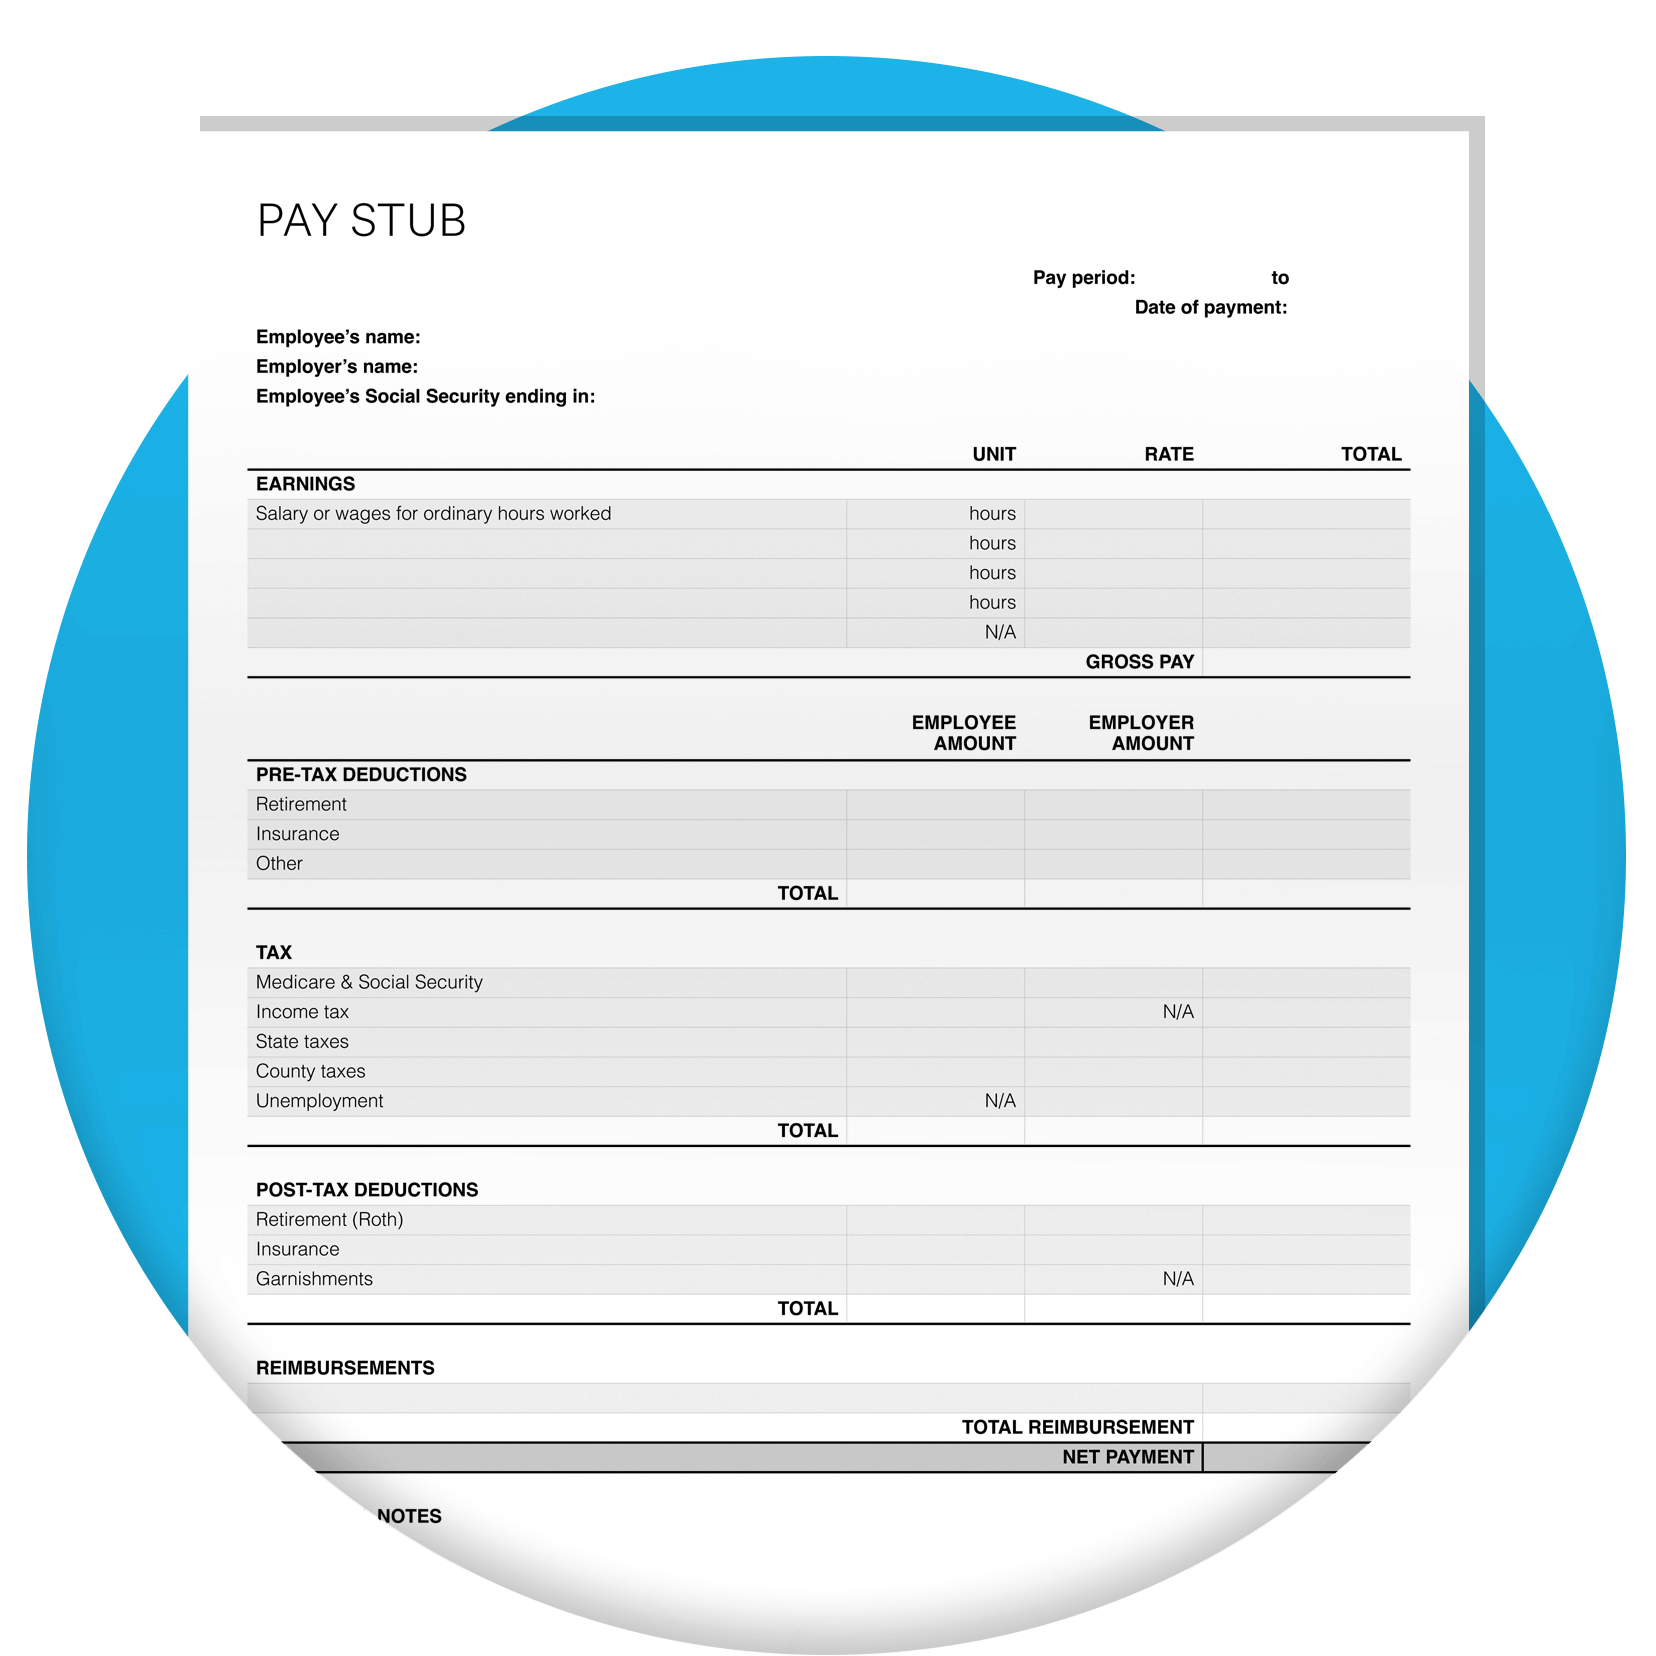 Pay stub template with blank fields for users to fill out